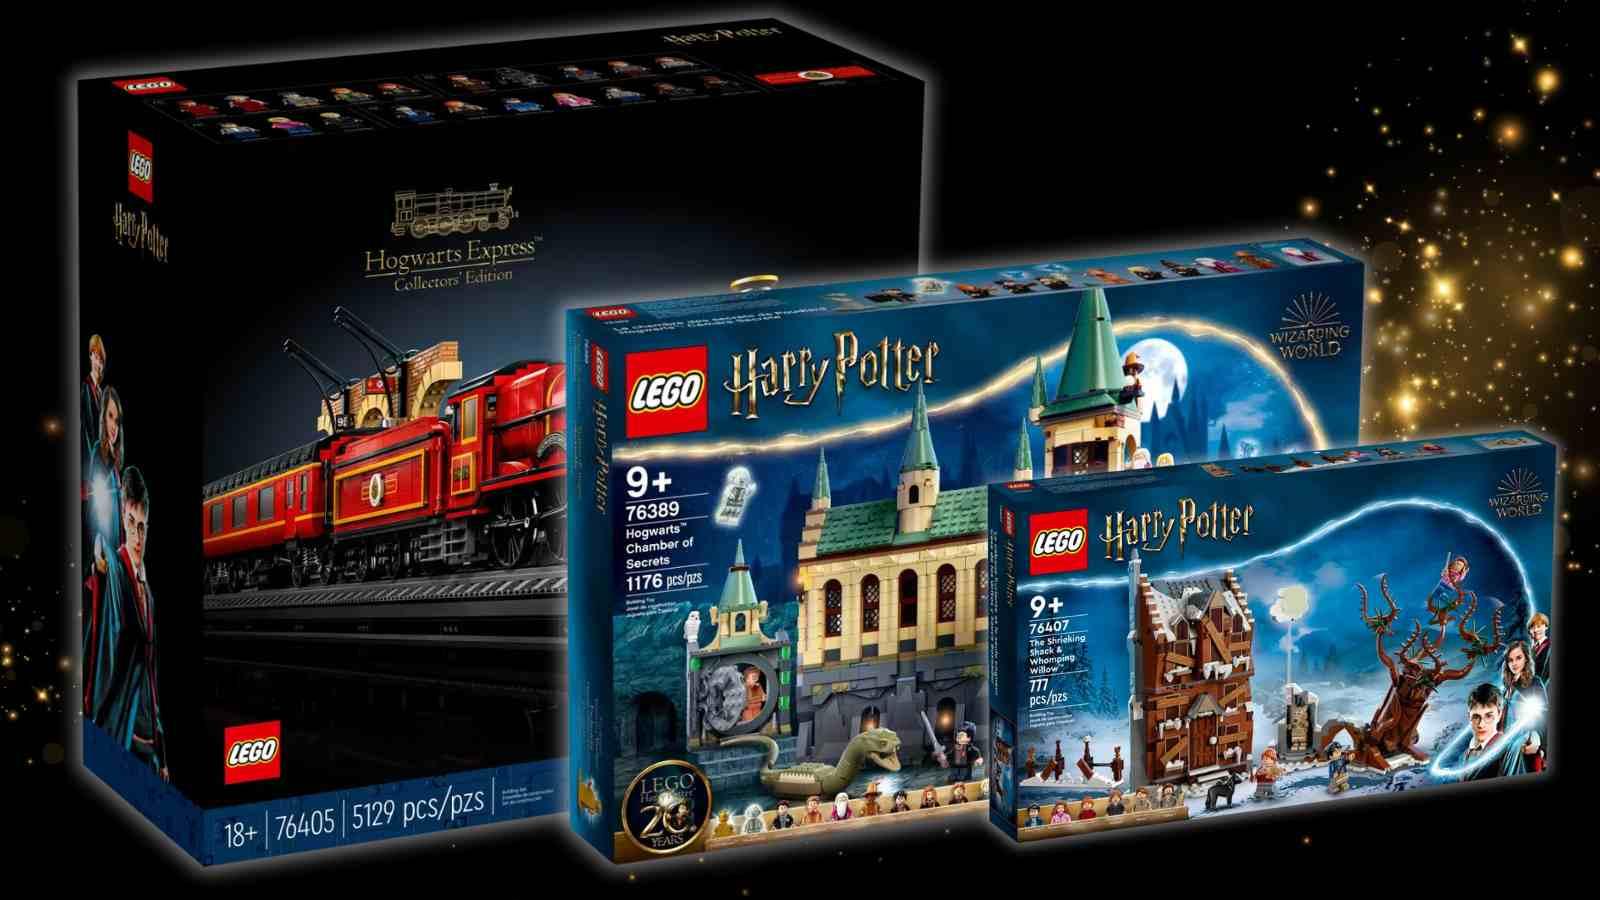 Three of the retiring LEGO Harry Potter sets on a black background with "magic" graphic